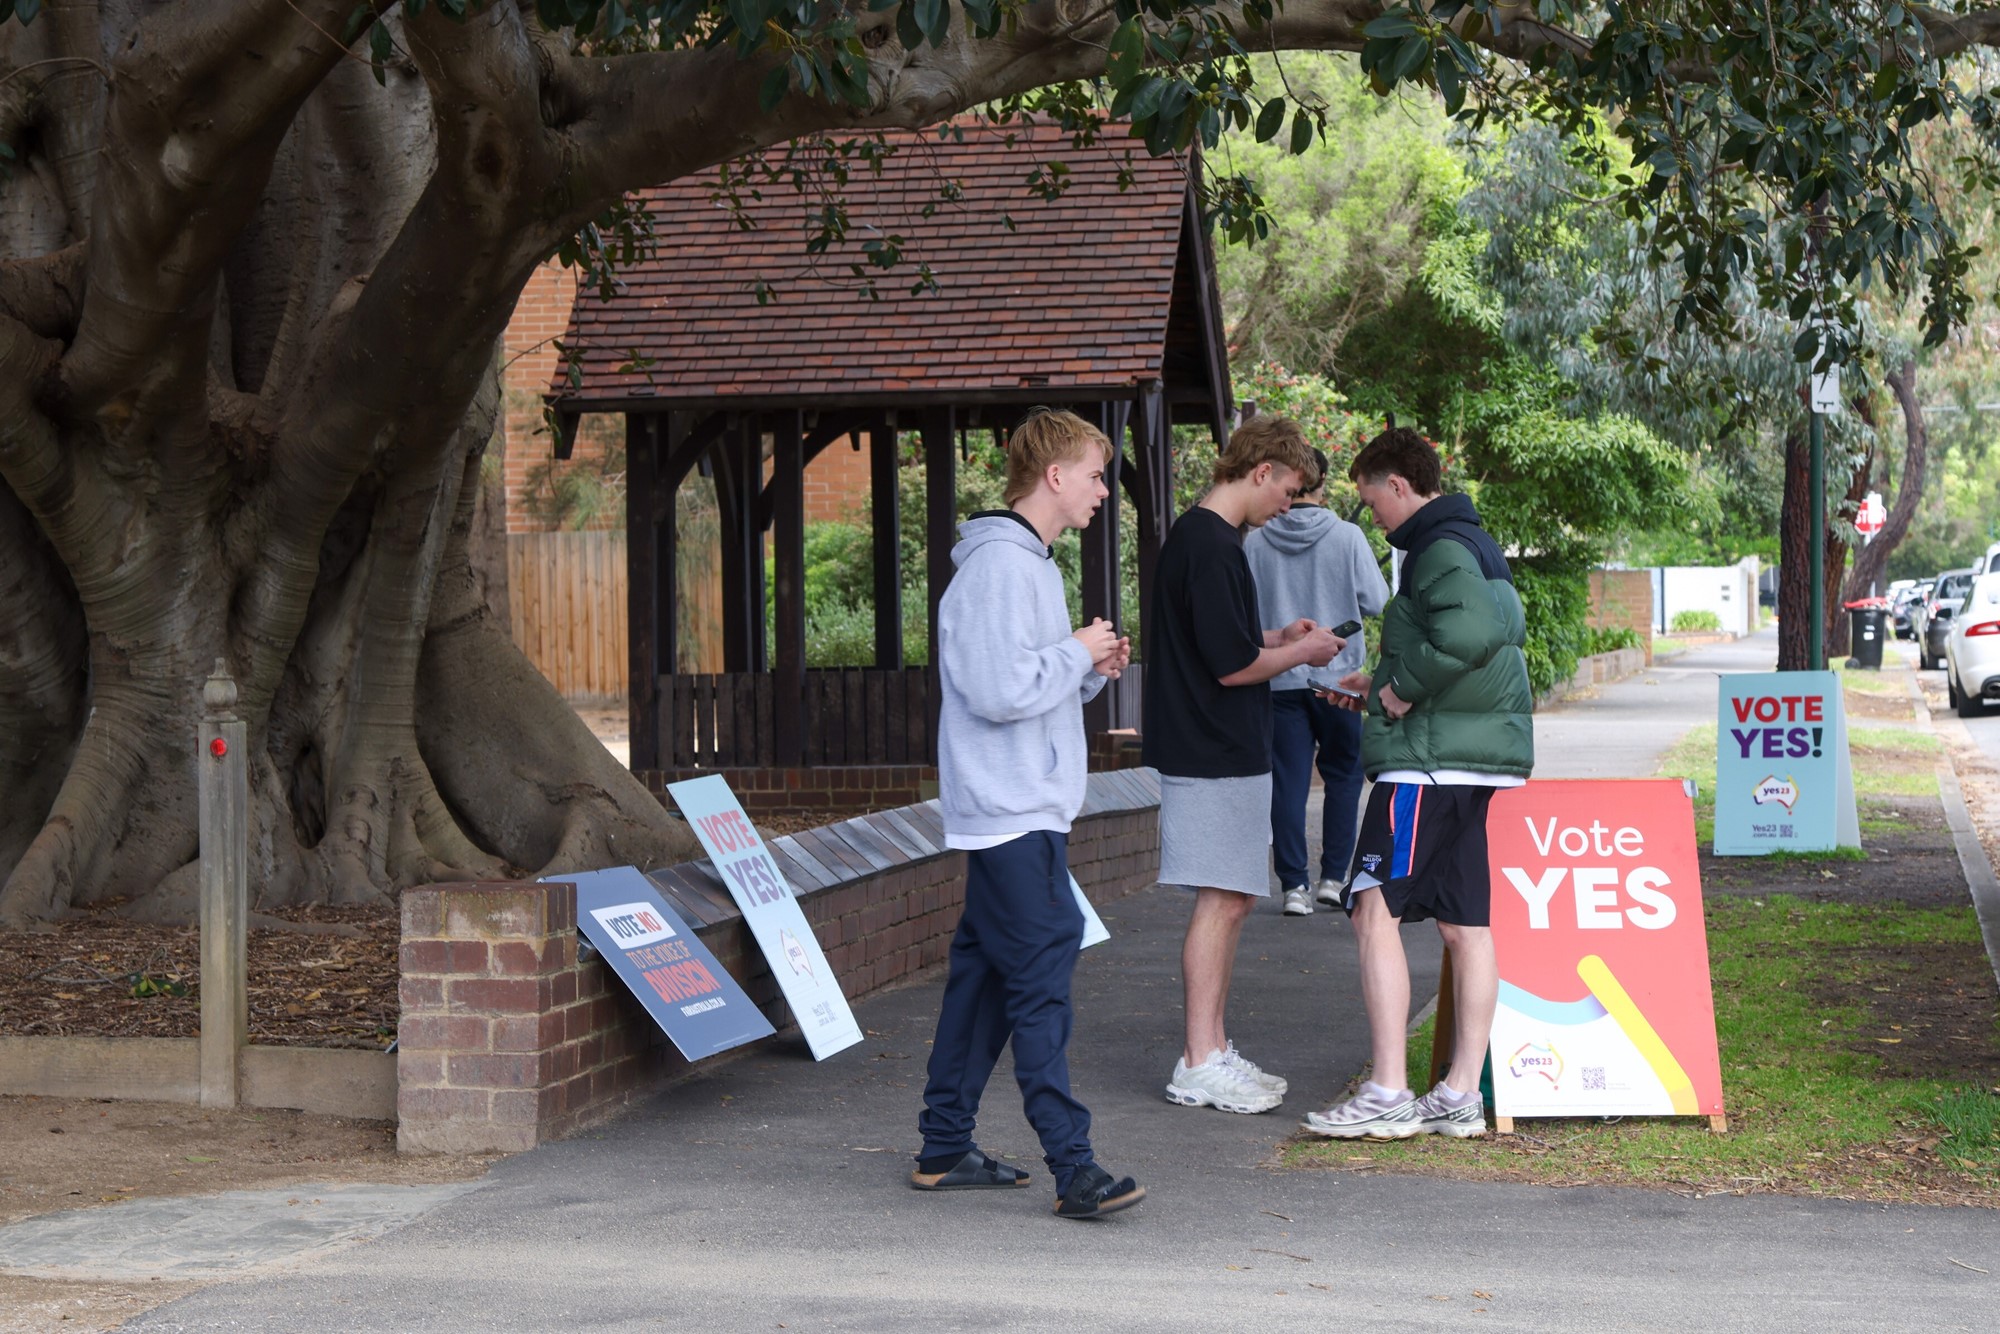 Young men at a polling station.